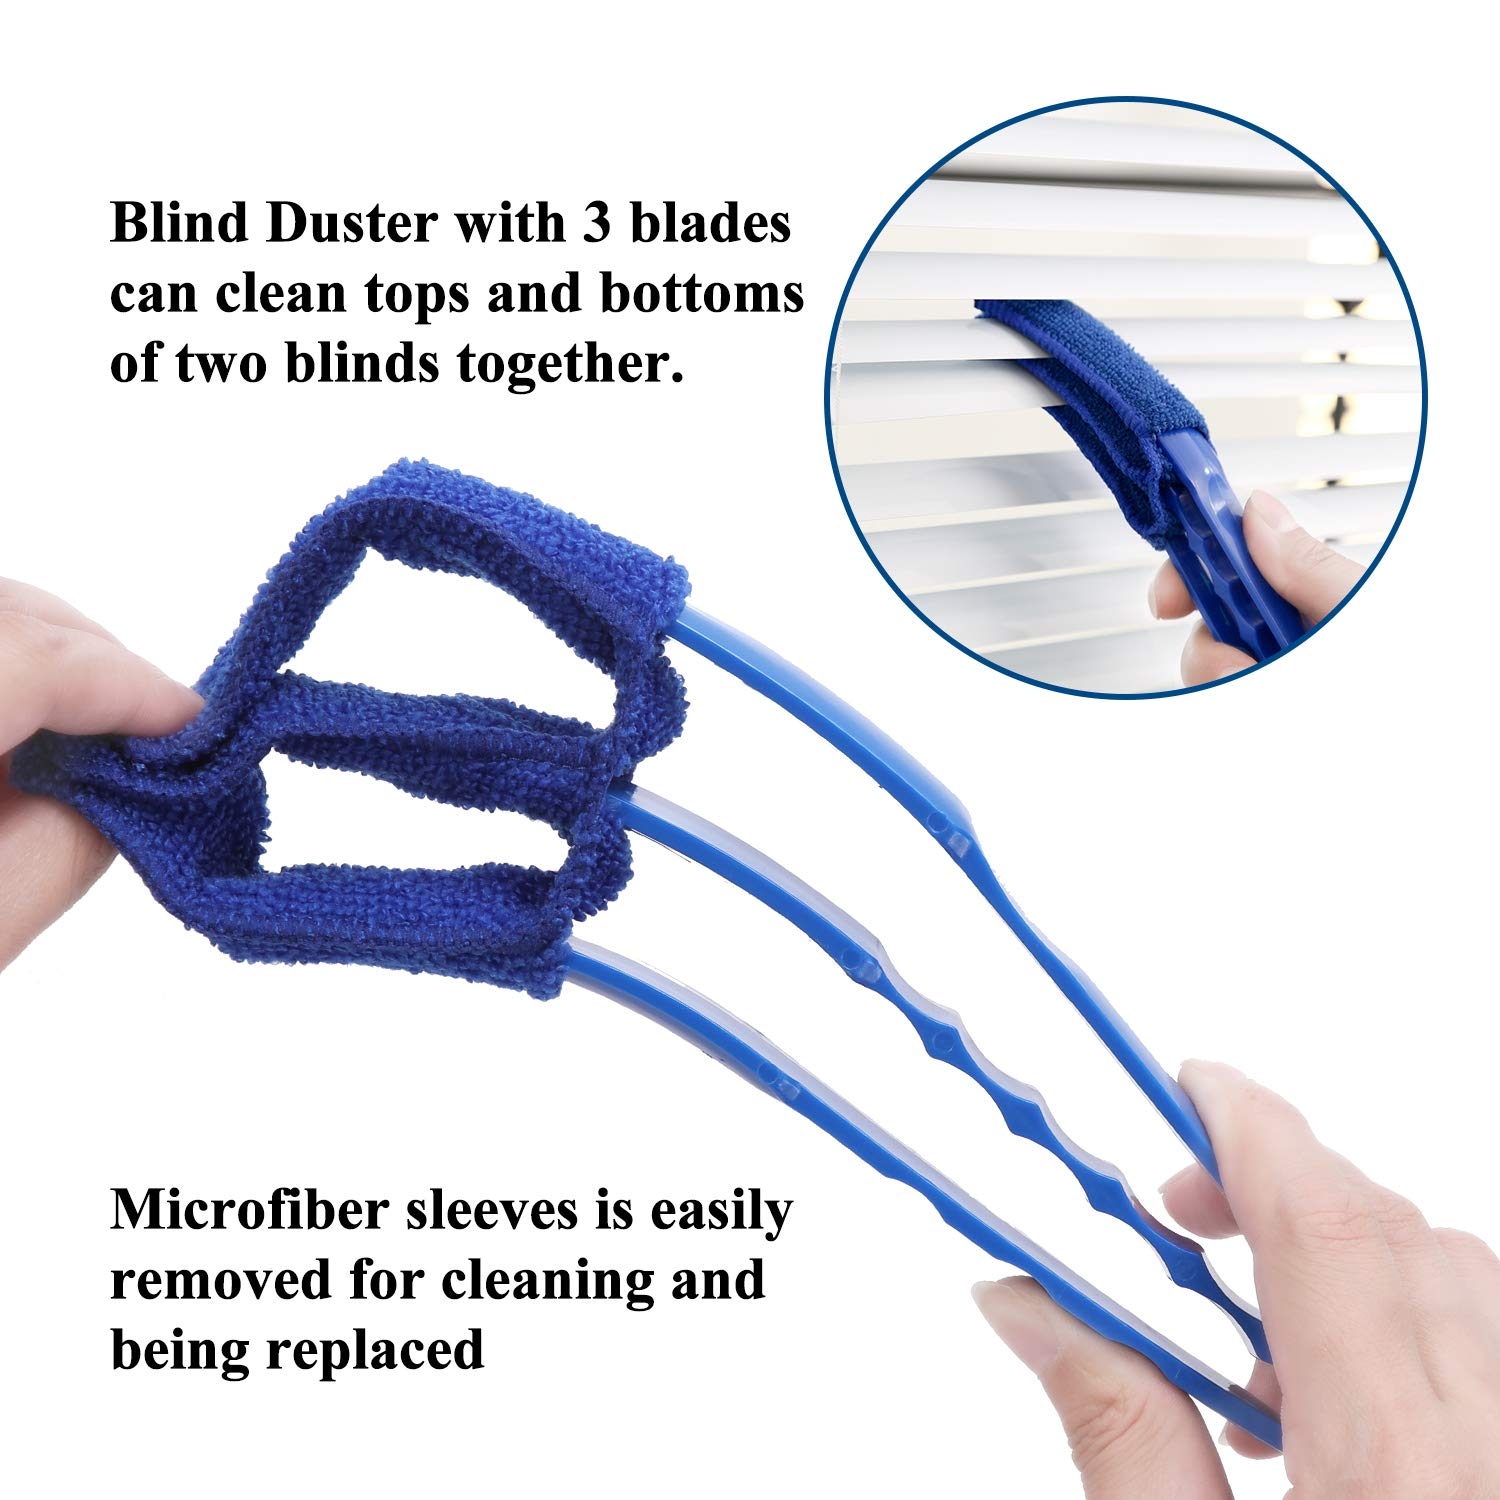 Hiware Window Blind Cleaner Duster Brush with 5 Microfiber Sleeves - Blind Cleaner Tools for Window Shutters Blind Air Conditioner Jalousie Dust